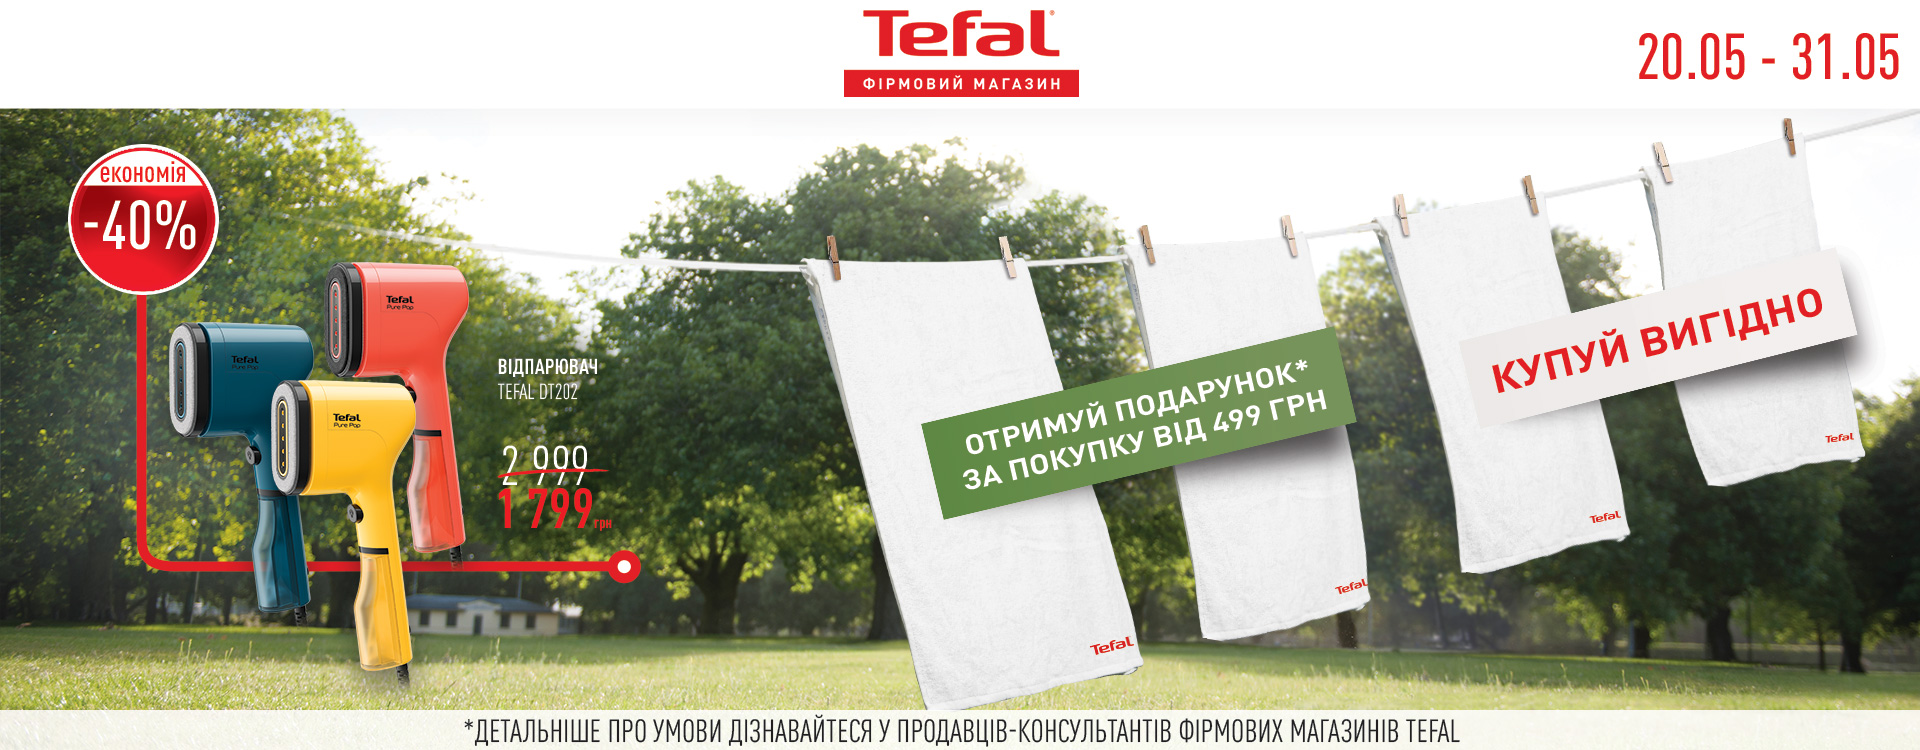 Promotion from Tefal "On the guard of cleanliness"